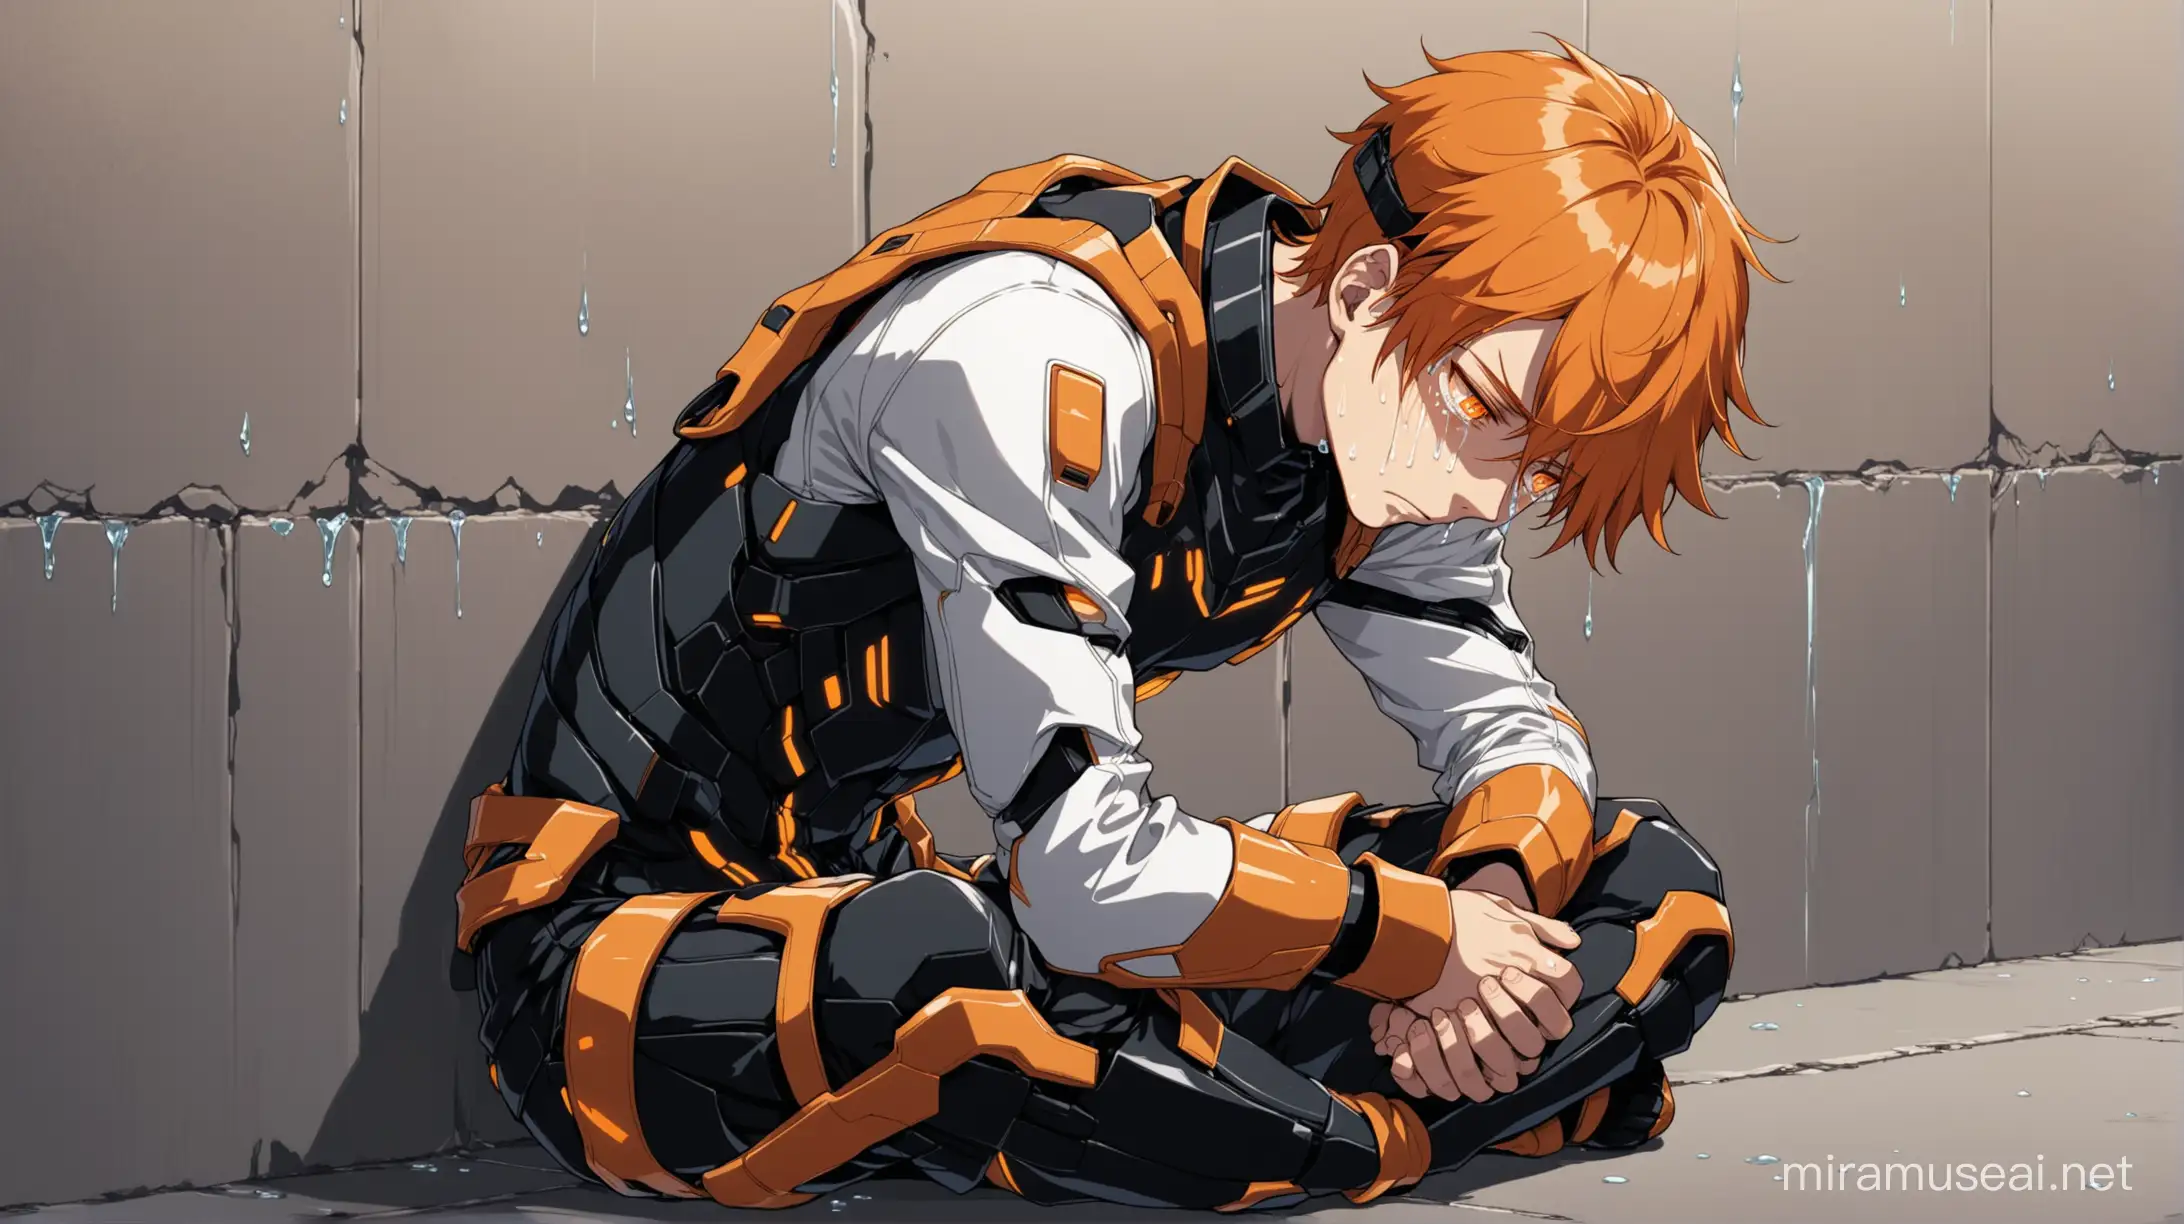 A side body image of an anime boy character who is sitting on the floor with support of a wall and his hands are tied and crying. He is handsome, orange headed, wearing futuristic clothes, orange crying eyes.